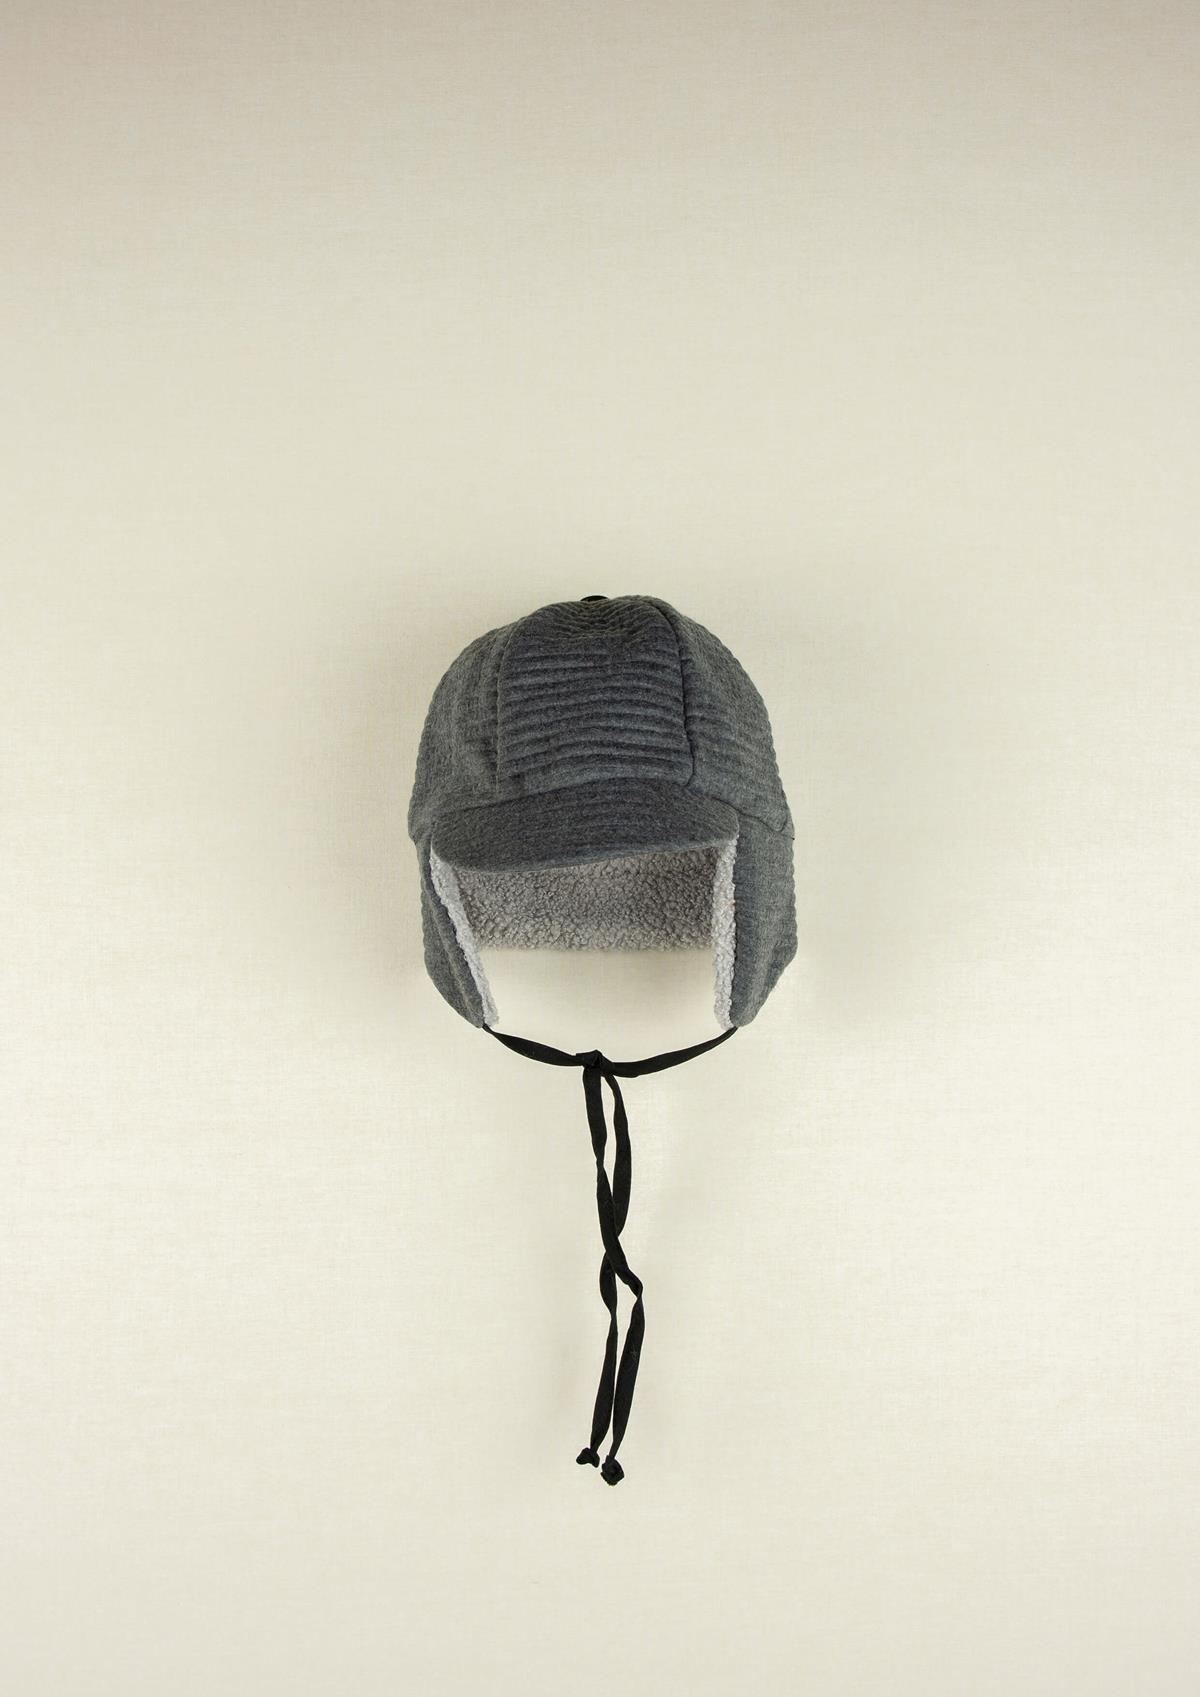 Mod. 35.3 Grey knitted reversible hat with earflaps | AW20.21 Mod. 35.3 Grey knitted reversible hat with earflaps | 1